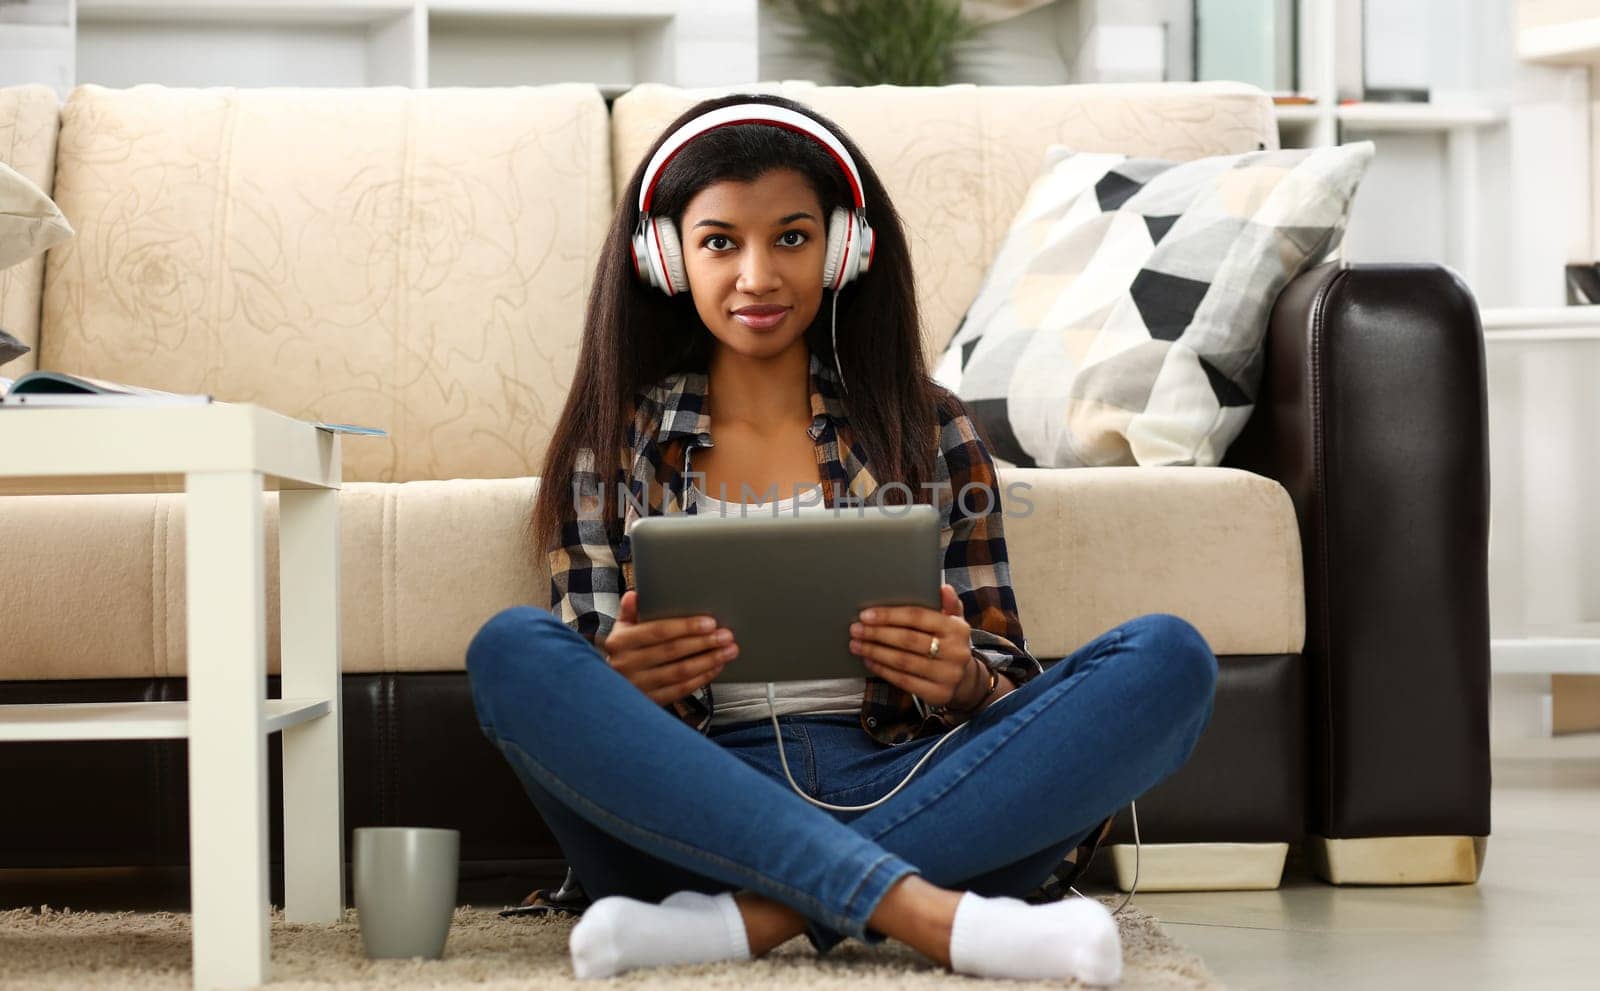 Black ordinary female american teen portrait at home sofa remote education concept. Girl hold tablet in hand music apps teacher checks homework online university library learning foreign languages